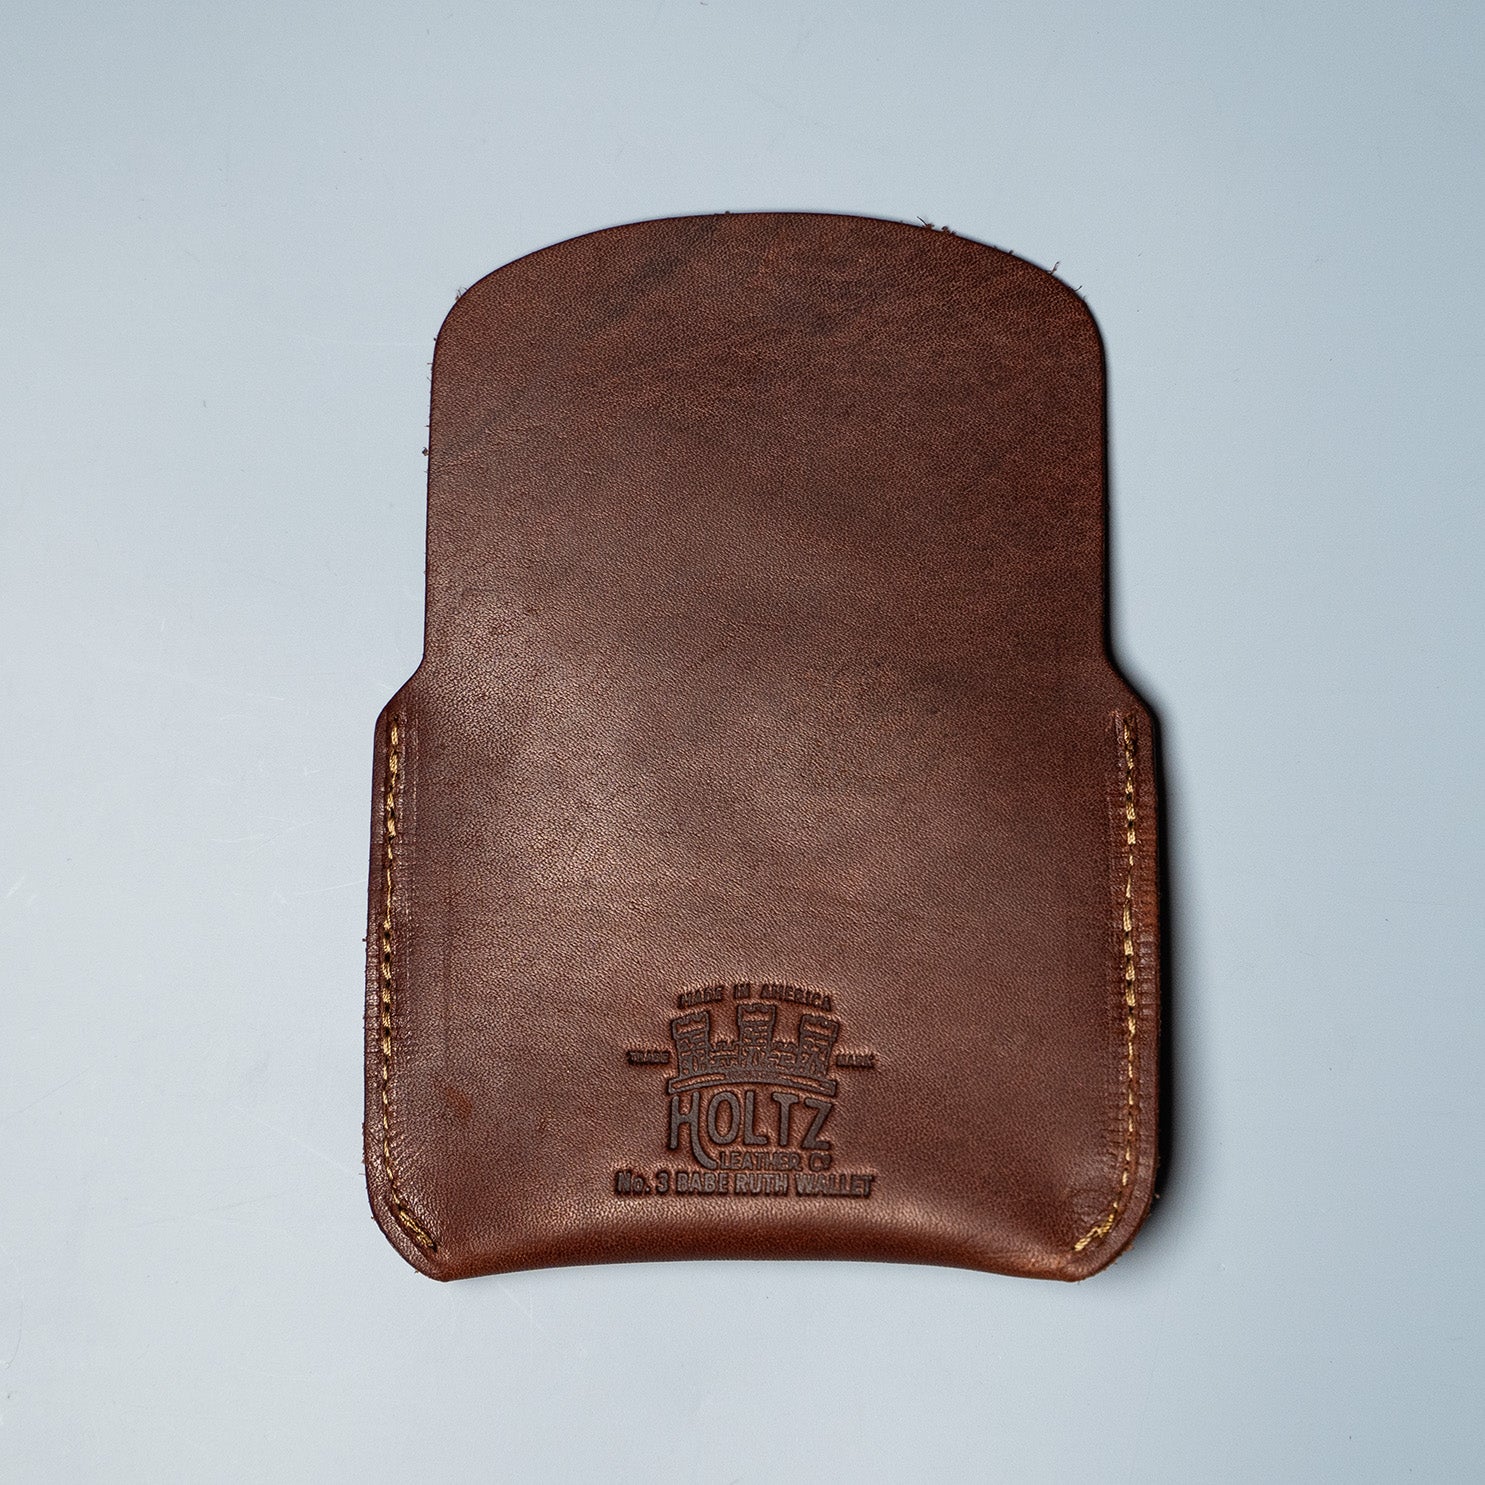 The Babe Ruth Collection - Unique Vintage Baseball Glove Wallets - Holtz  Leather